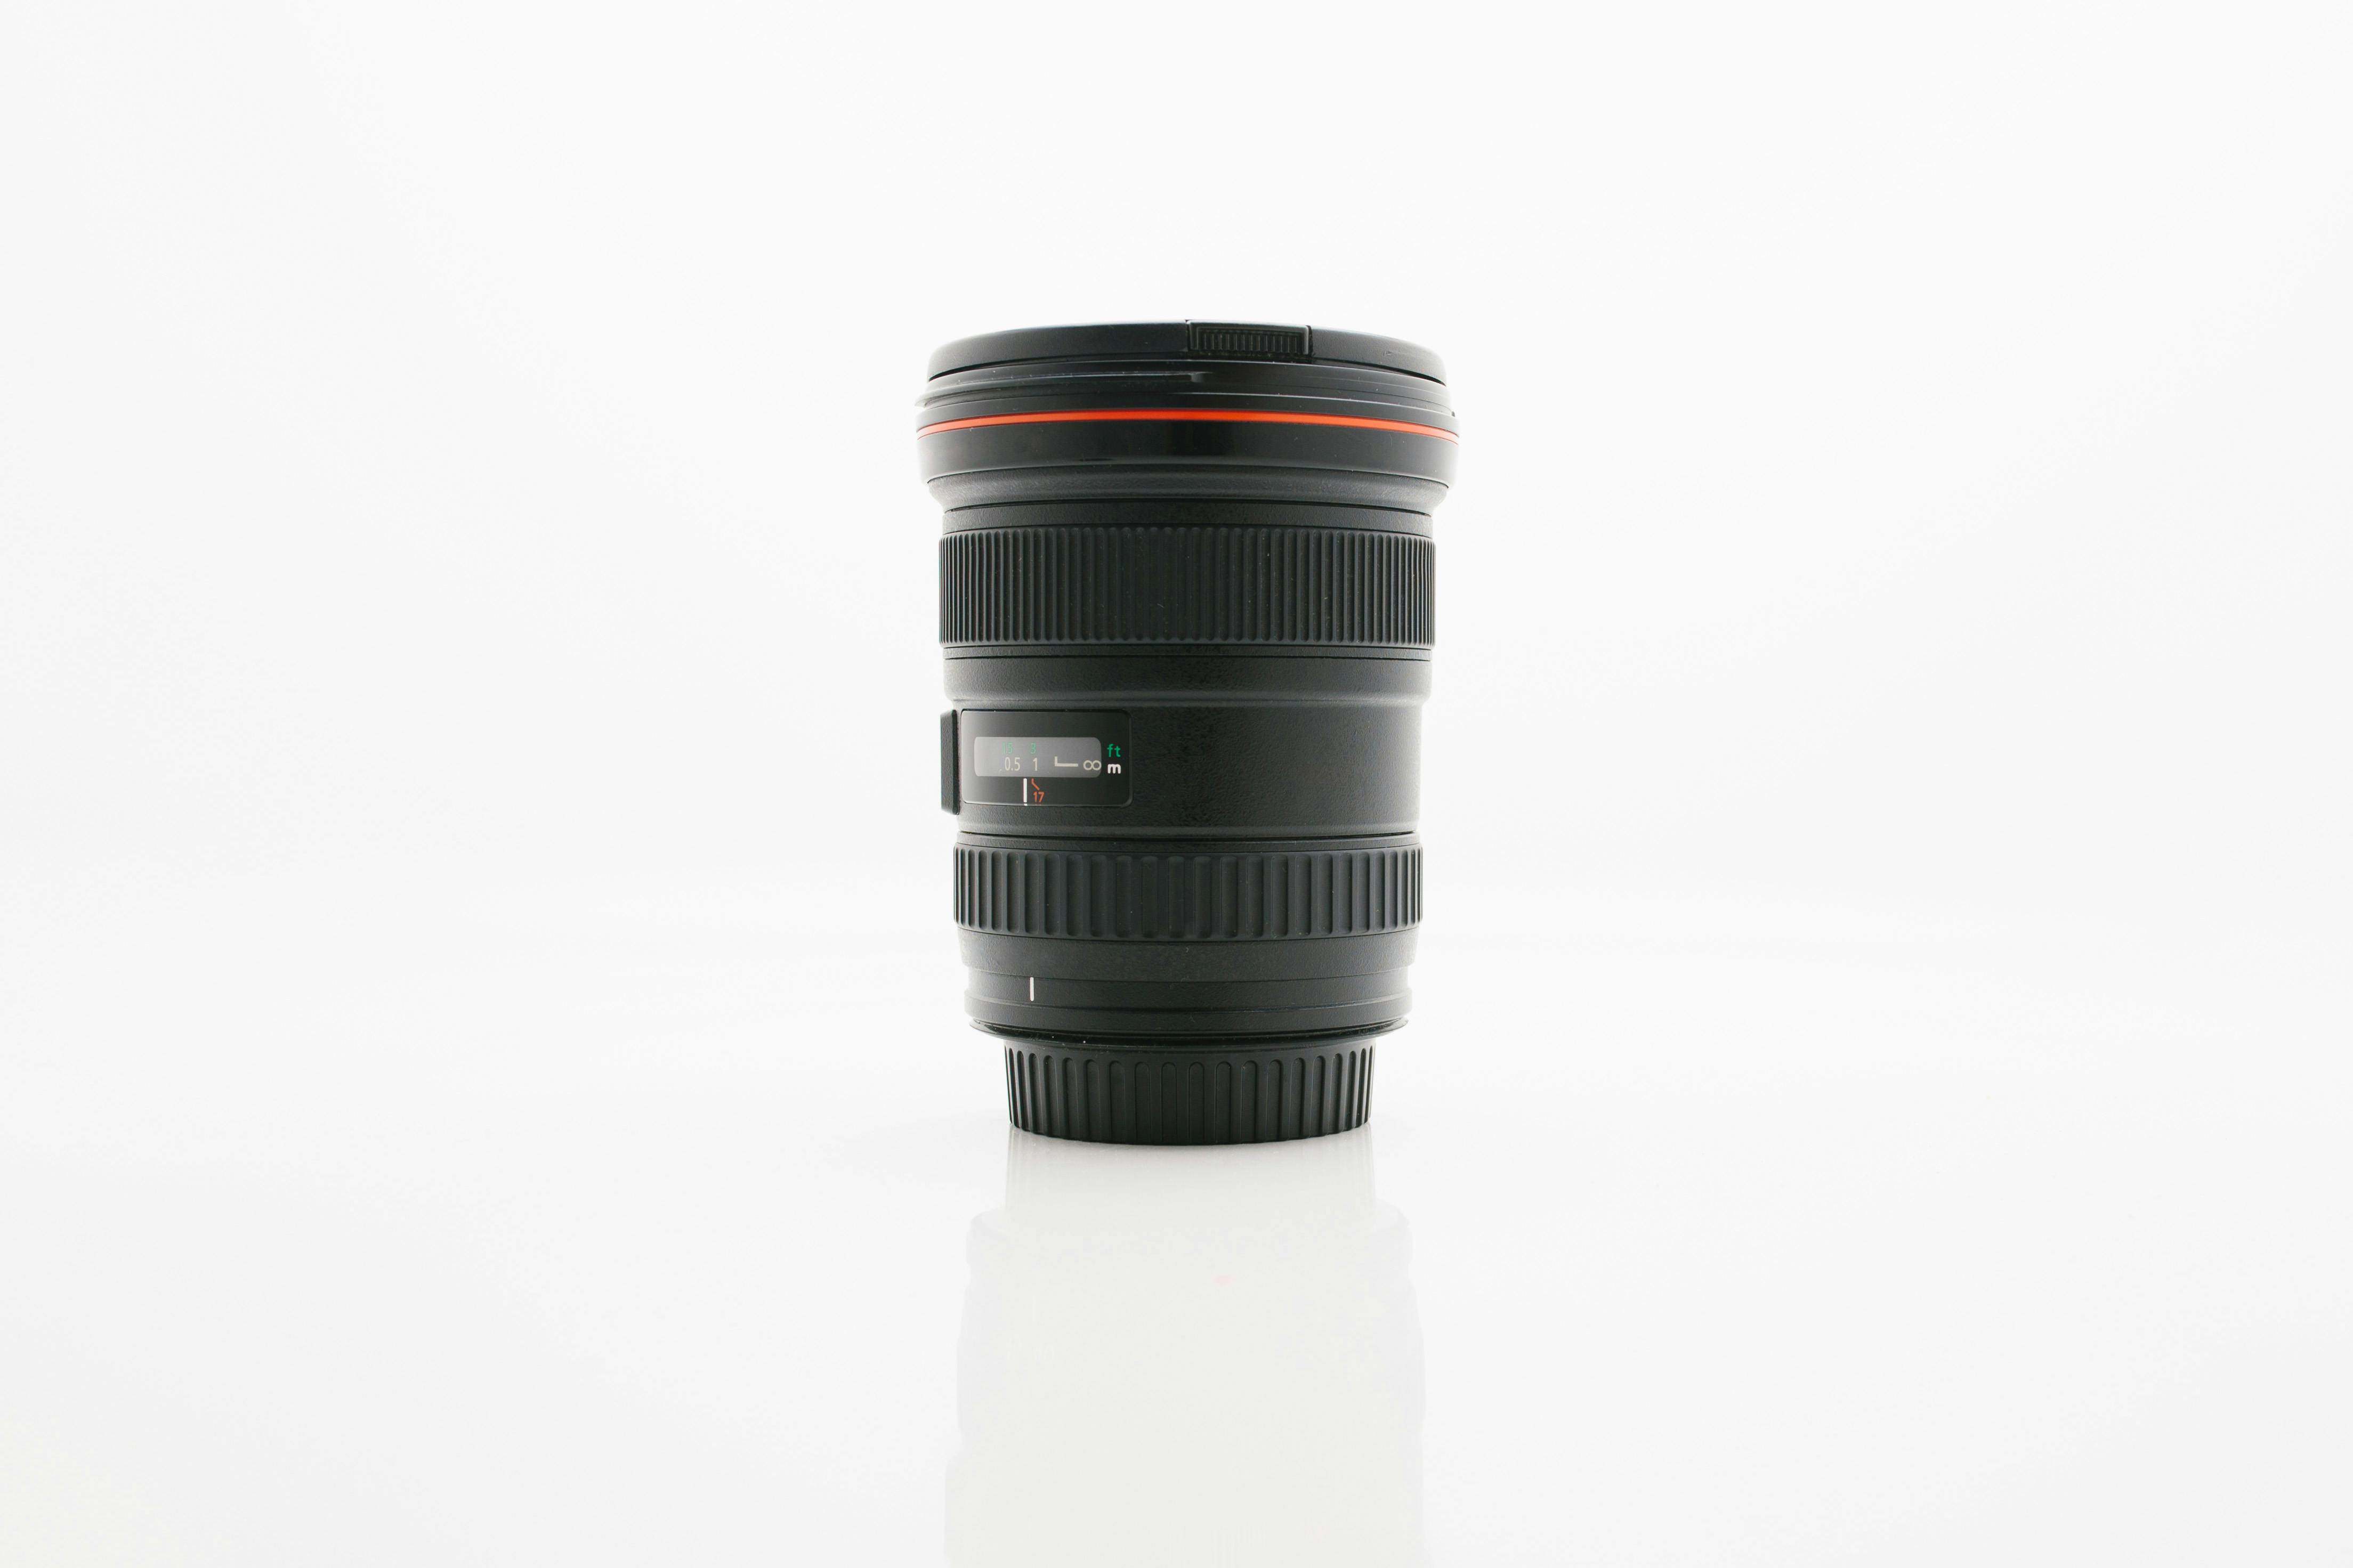 Free stock photo of lens, photography equipment